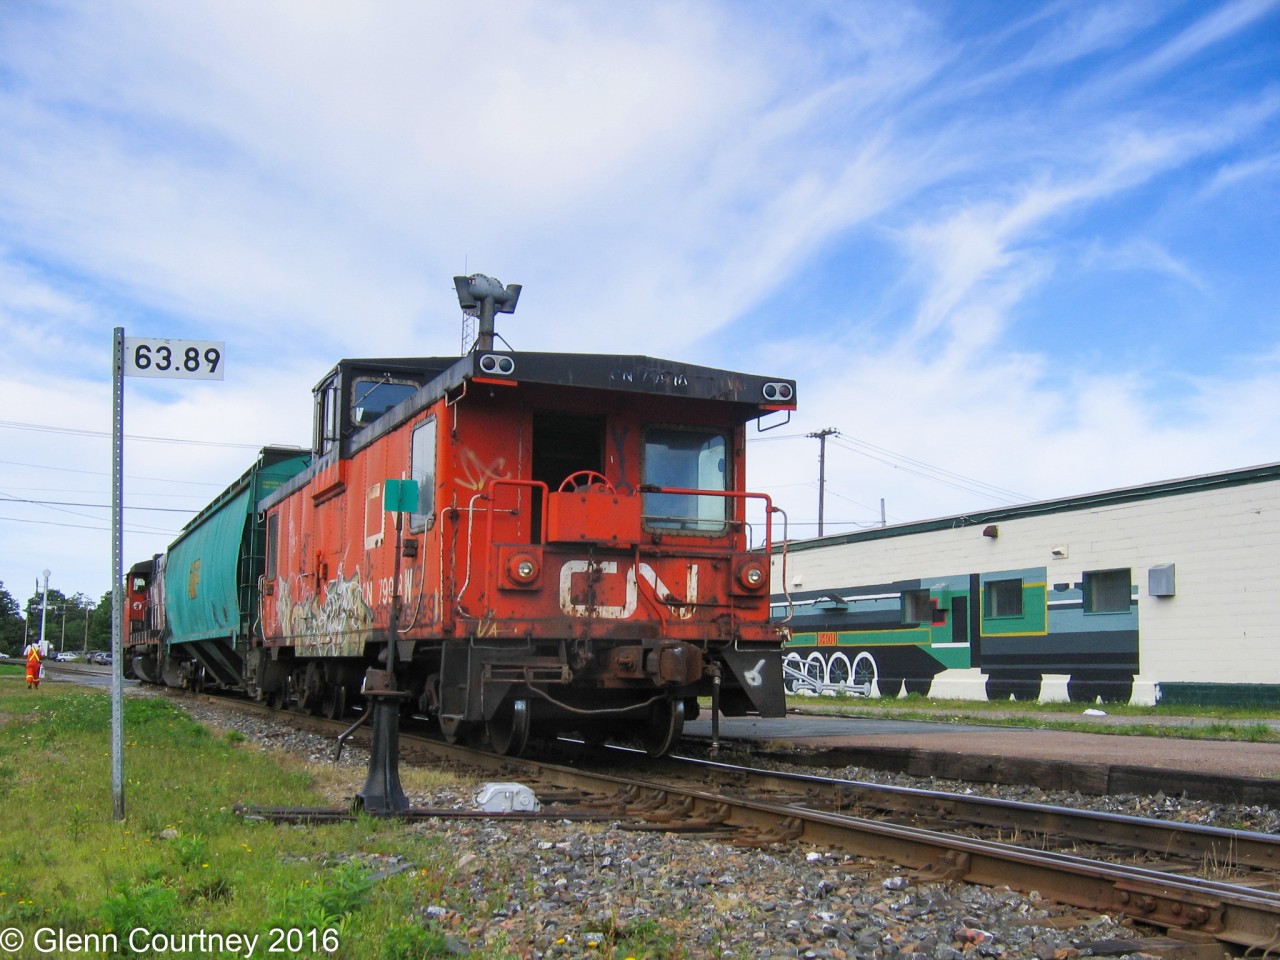 CN 515 is pulling out of the siding across from the station and heading east to do some switching at one of the feed mills on the east side of town. Looking in on the action is the CN 6401 mural on the wall of the shopping centre that replaced CN's station.